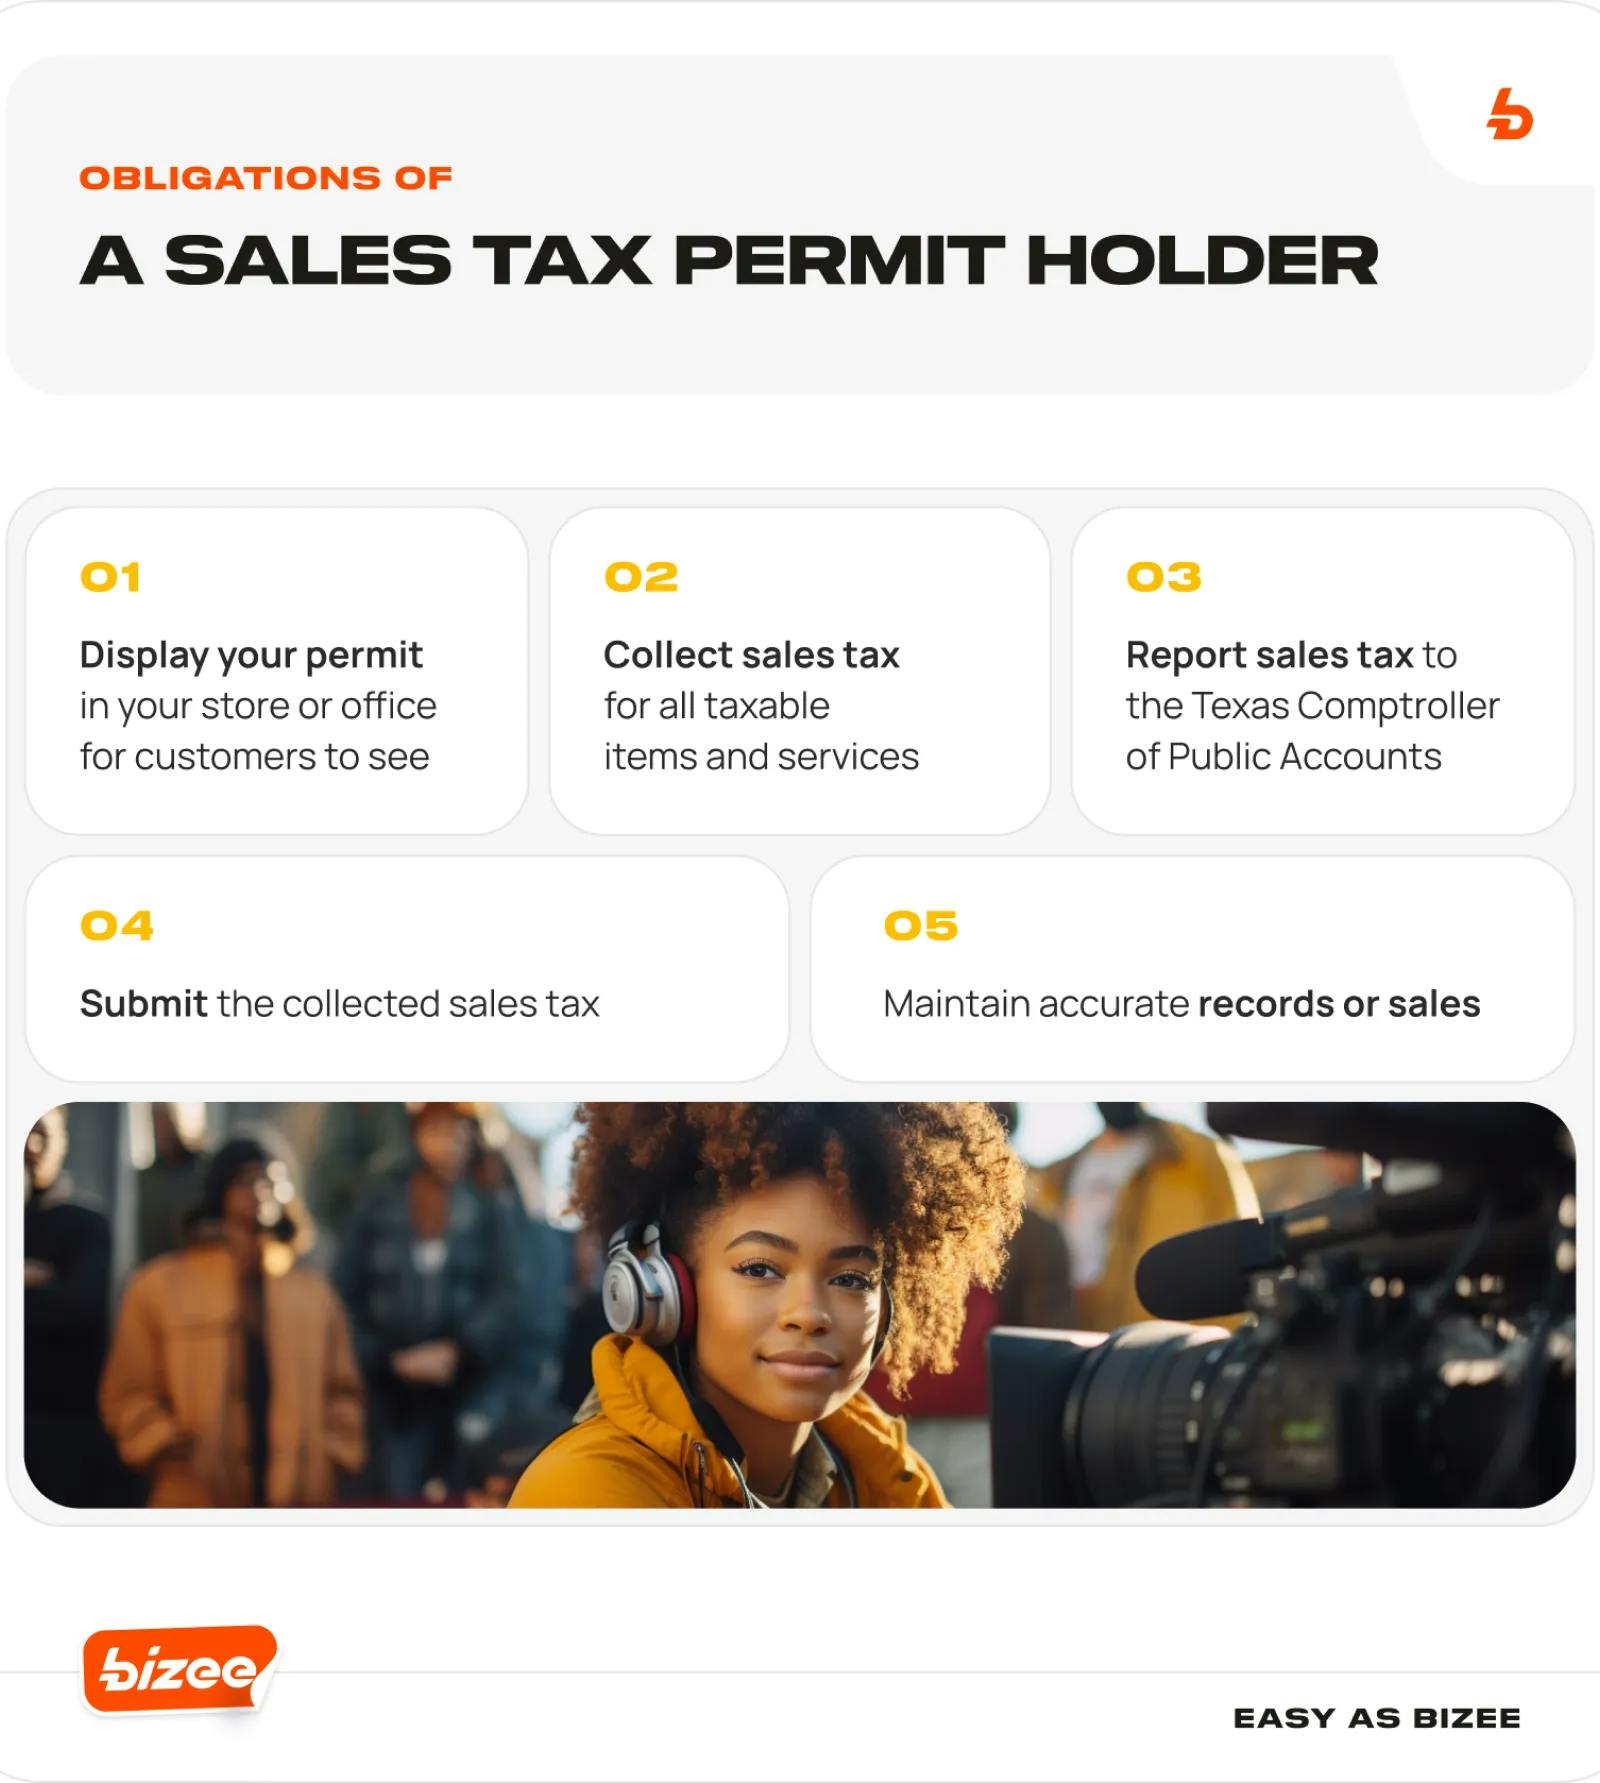 Obligations of a Sales Tax Permit Holder